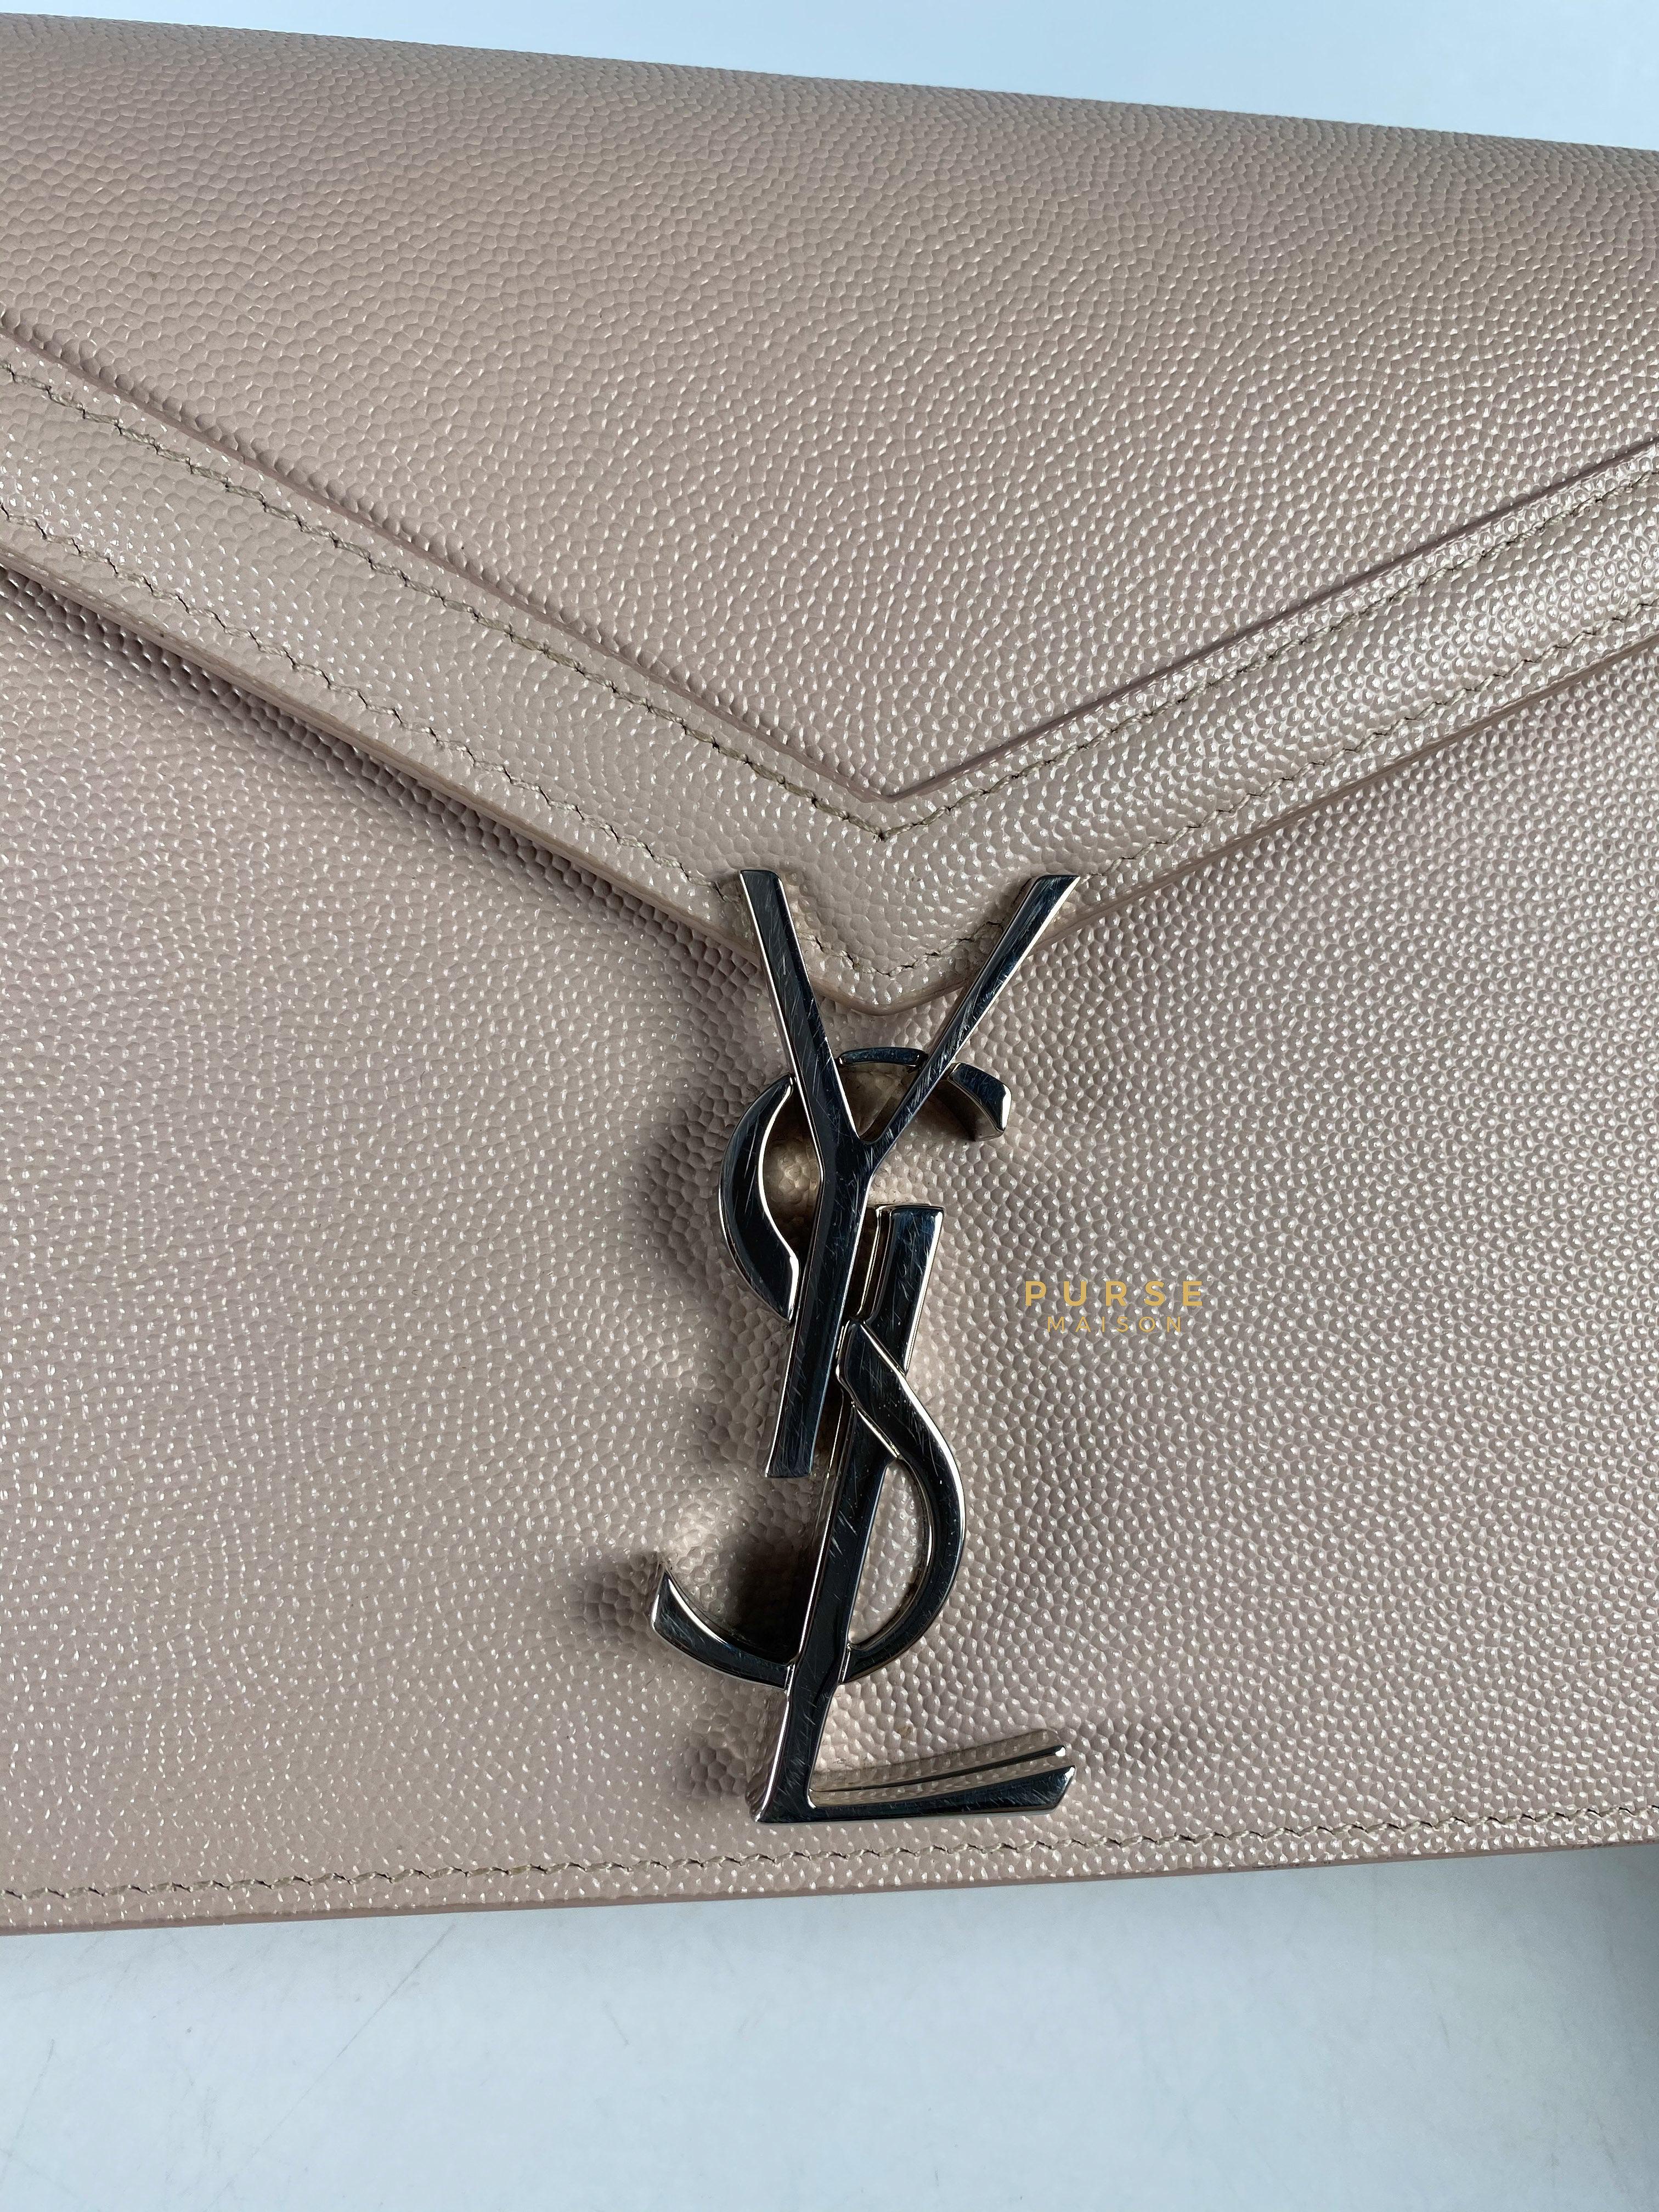 YSL Cassandra in Marble Pink Grain Leather | Purse Maison Luxury Bags Shop